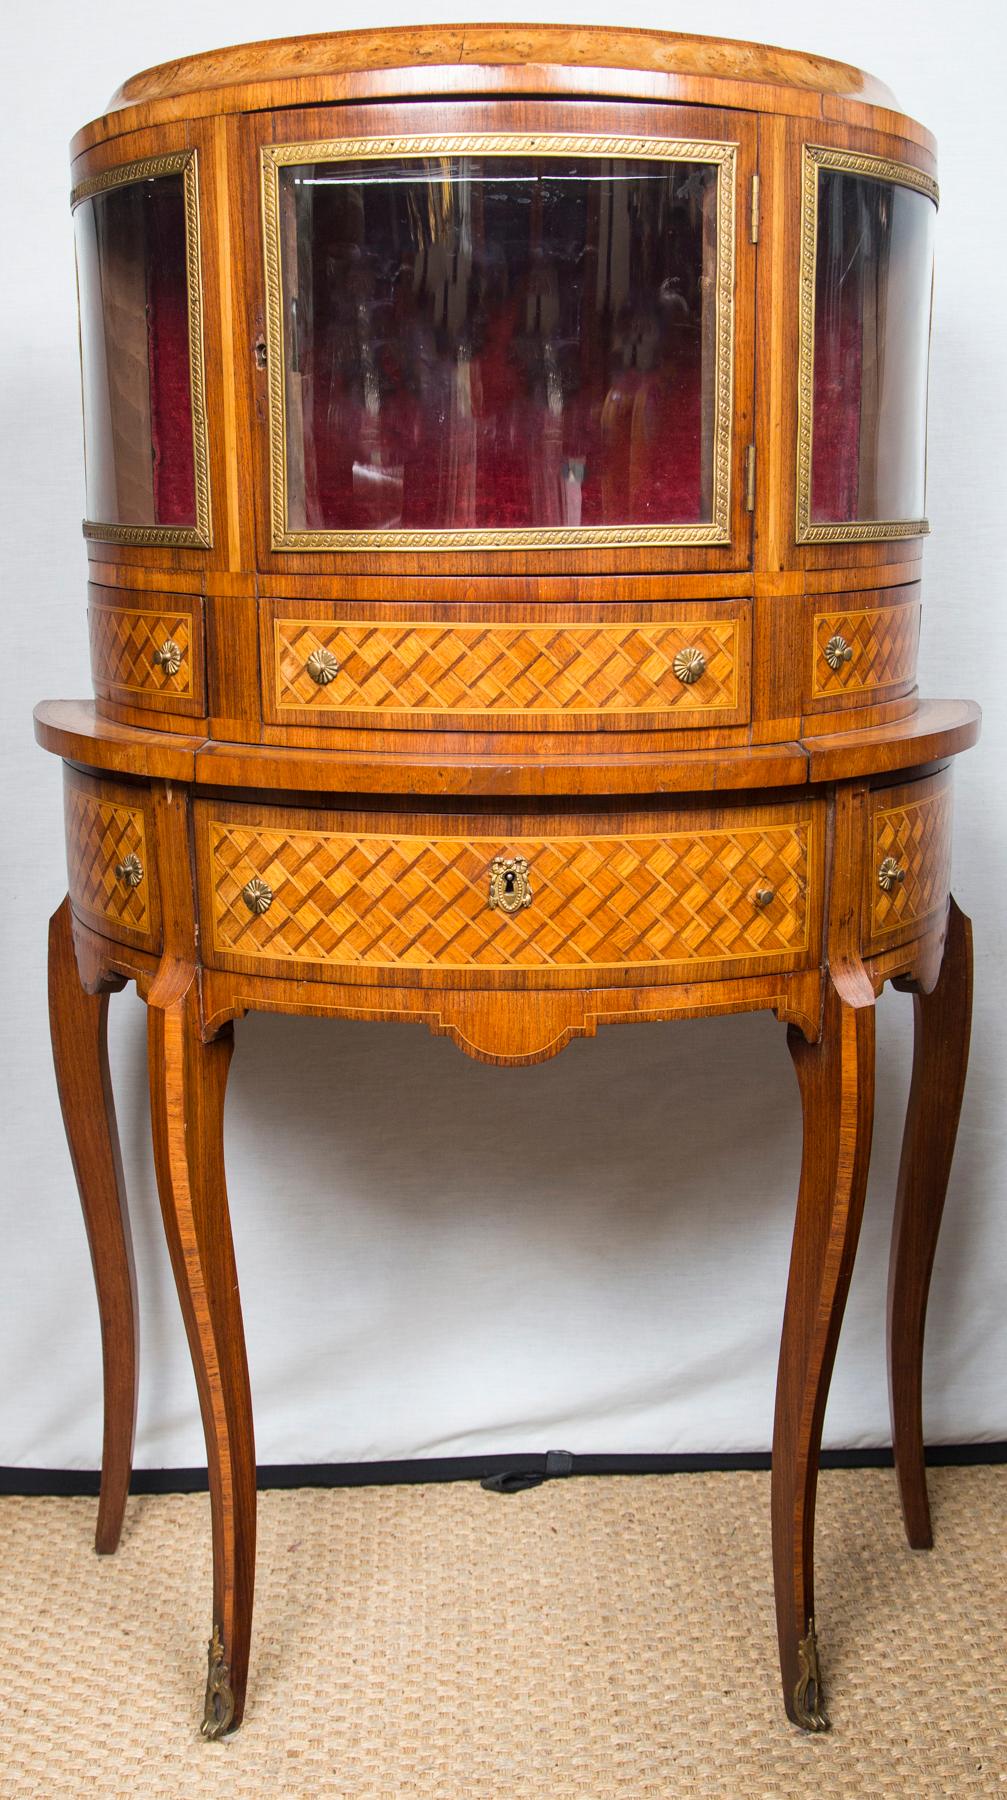 Marquetry inlay on mahogany. Center glass door, flanked by non-opening glass windows.
Three drawers below.
The base also with 3 drawers. Cabriole legs.